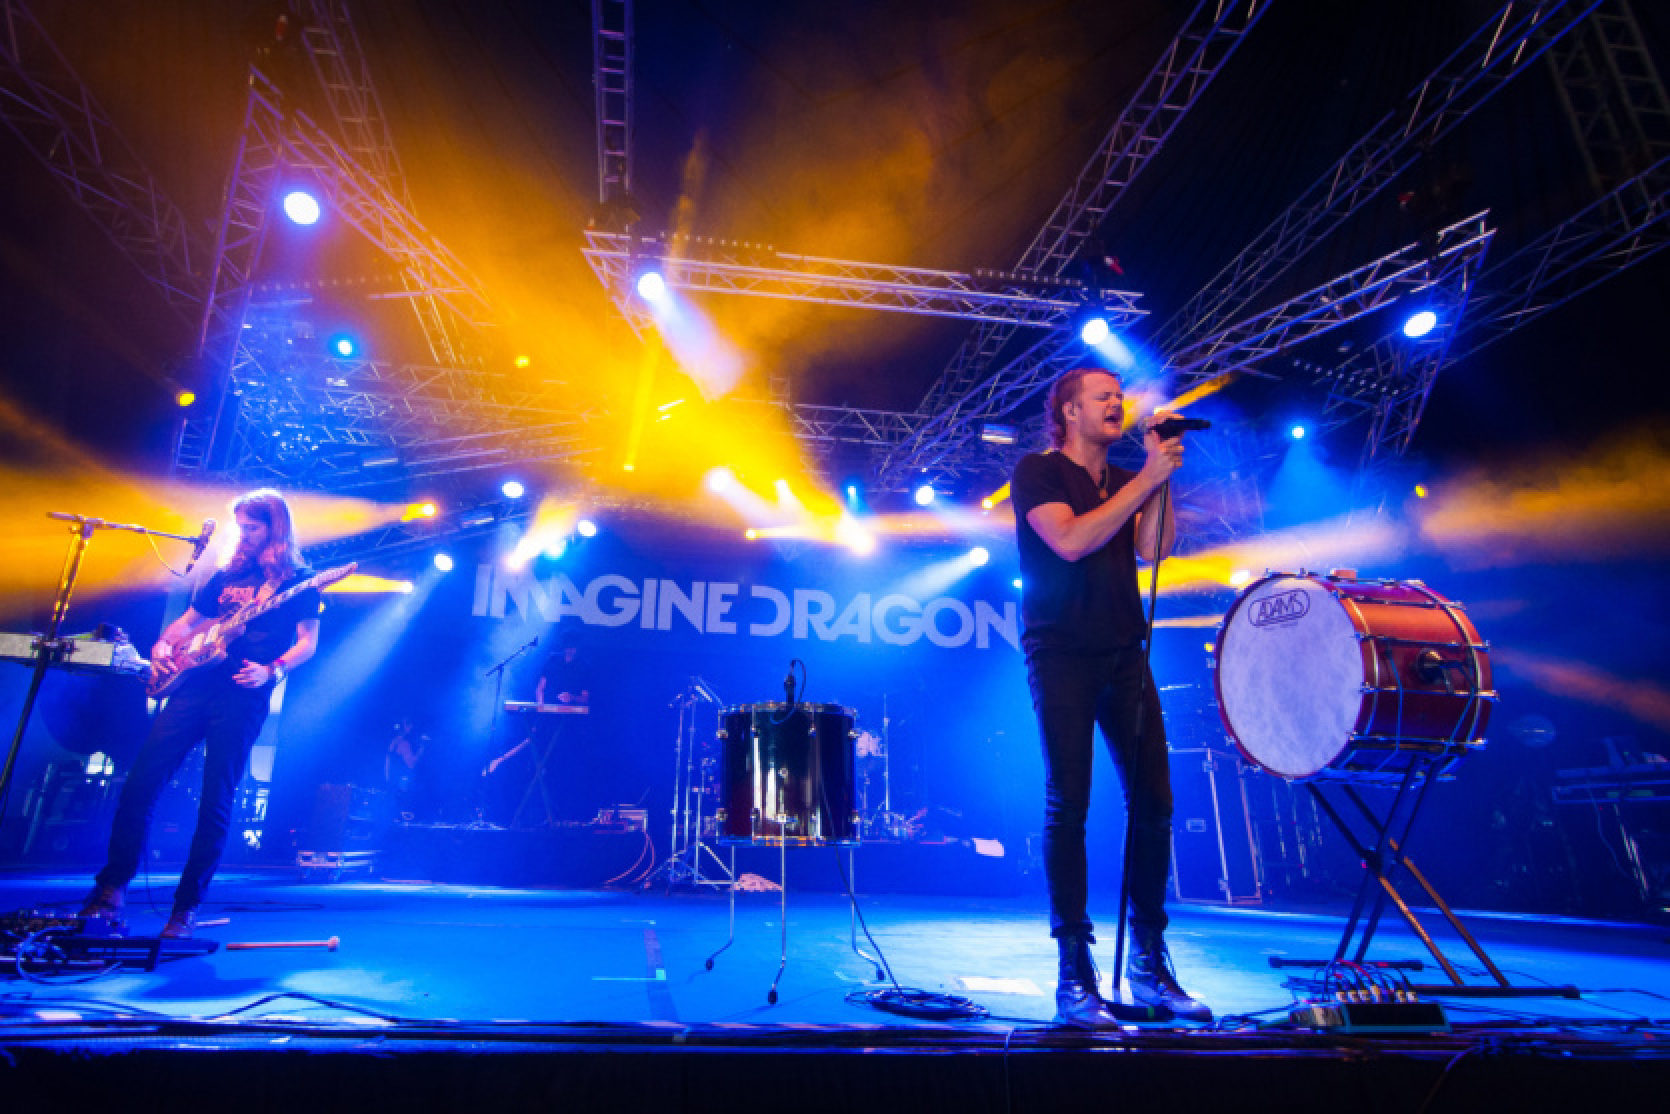 Imagine Dragons were late to their own concerts because of playing League Of Legends - the musicians spoke about their love of games